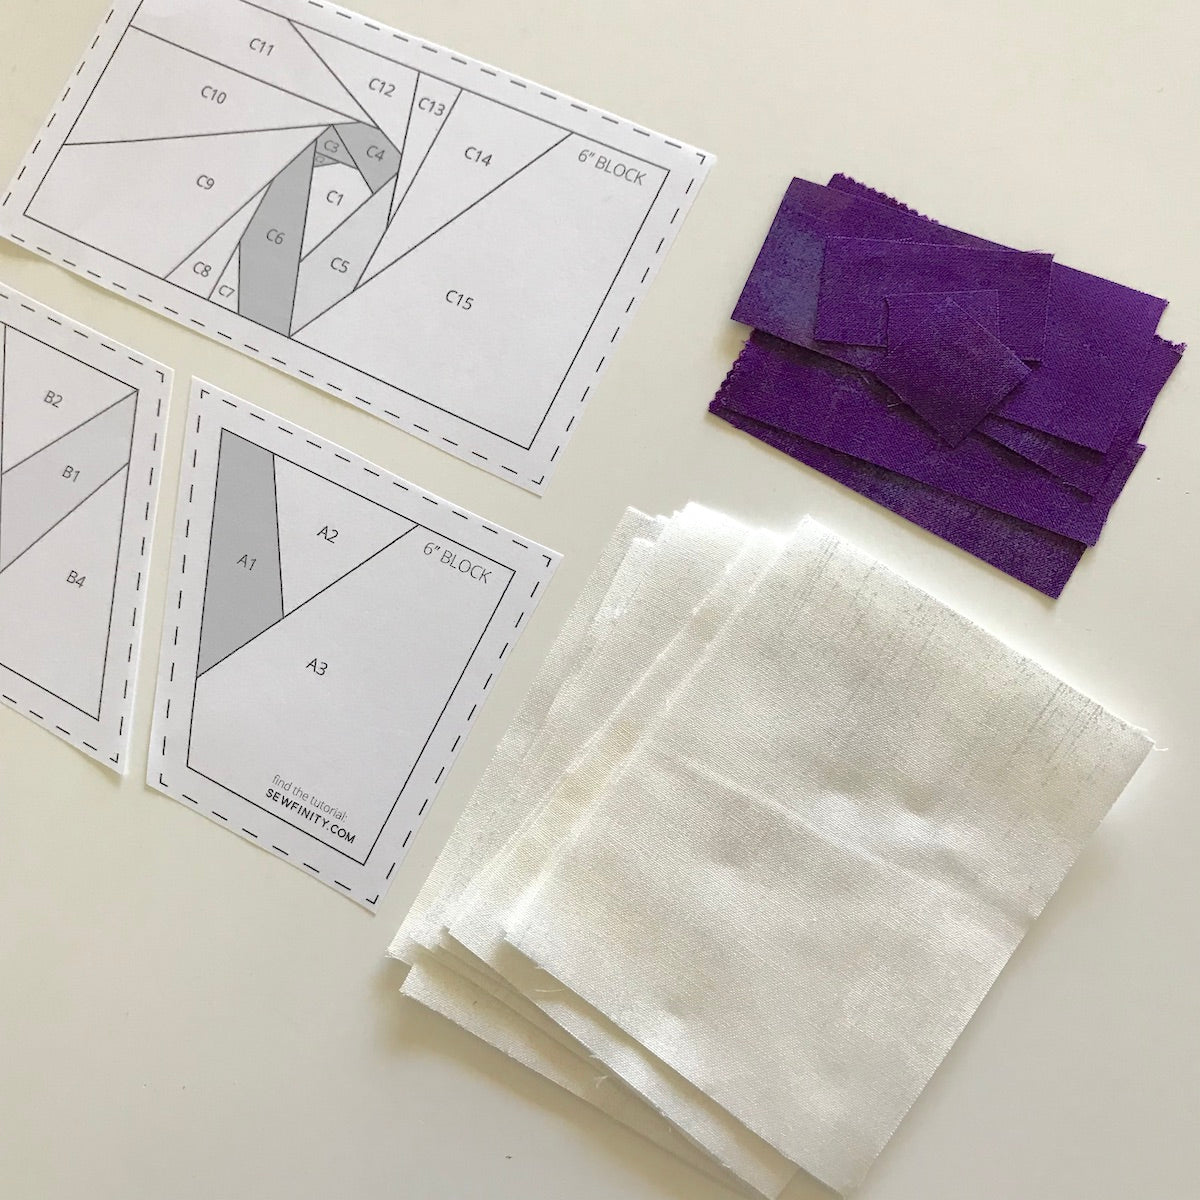 Foundation Paper Piecing Pattern and fabric